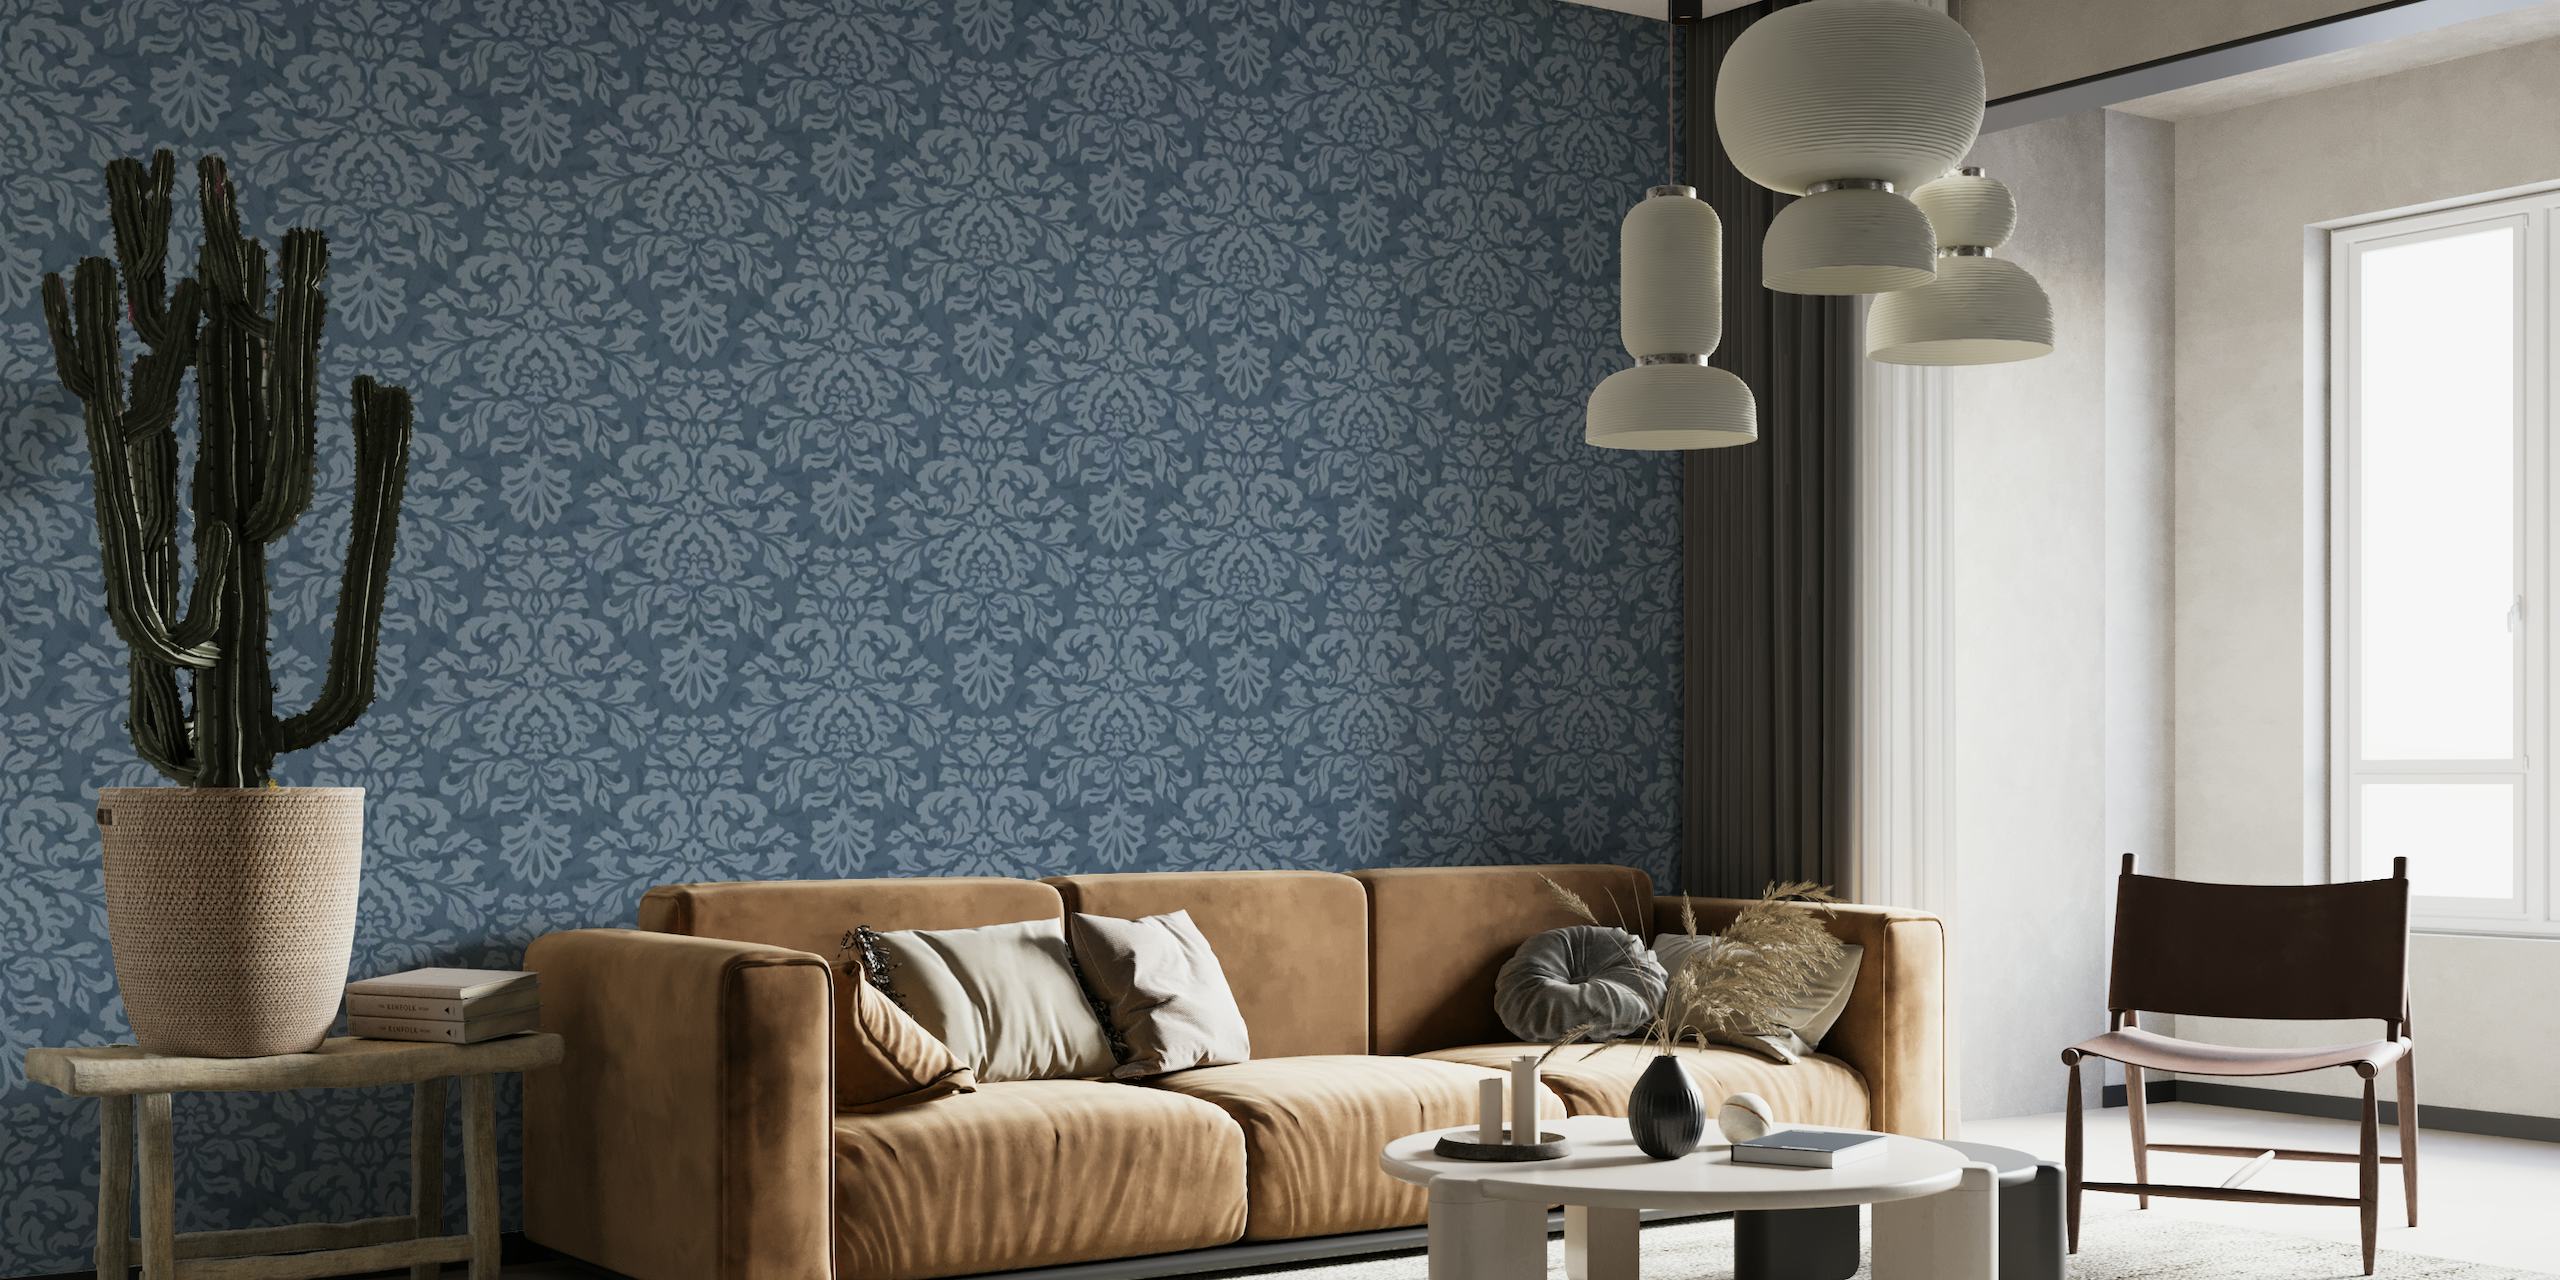 Classic blue damask pattern wall mural to add elegance to your space